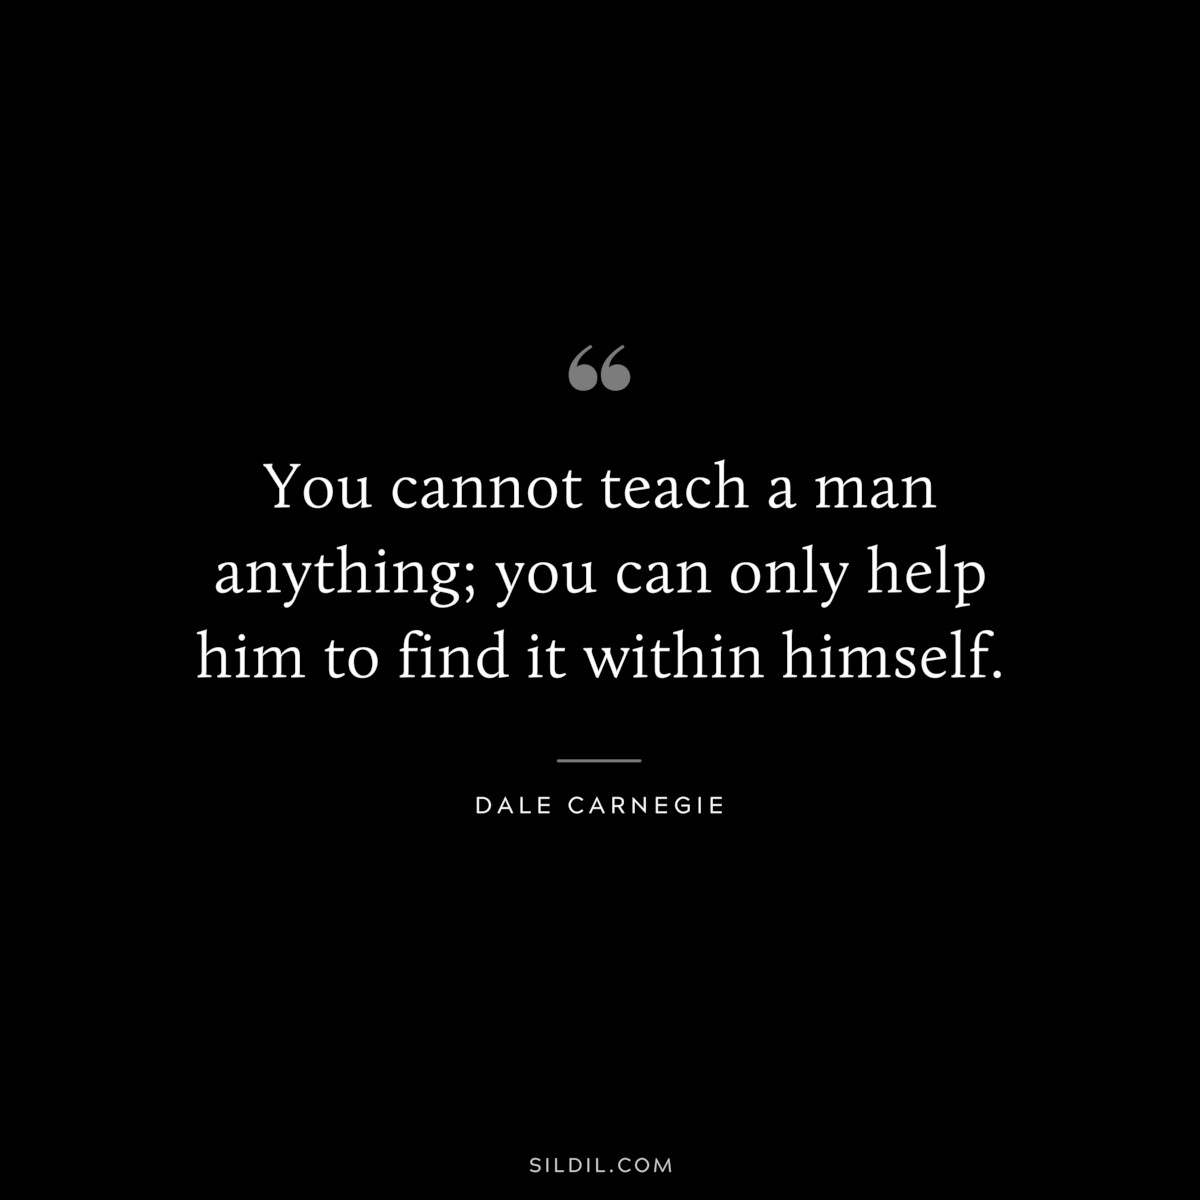 You cannot teach a man anything; you can only help him to find it within himself.― Dale Carnegie